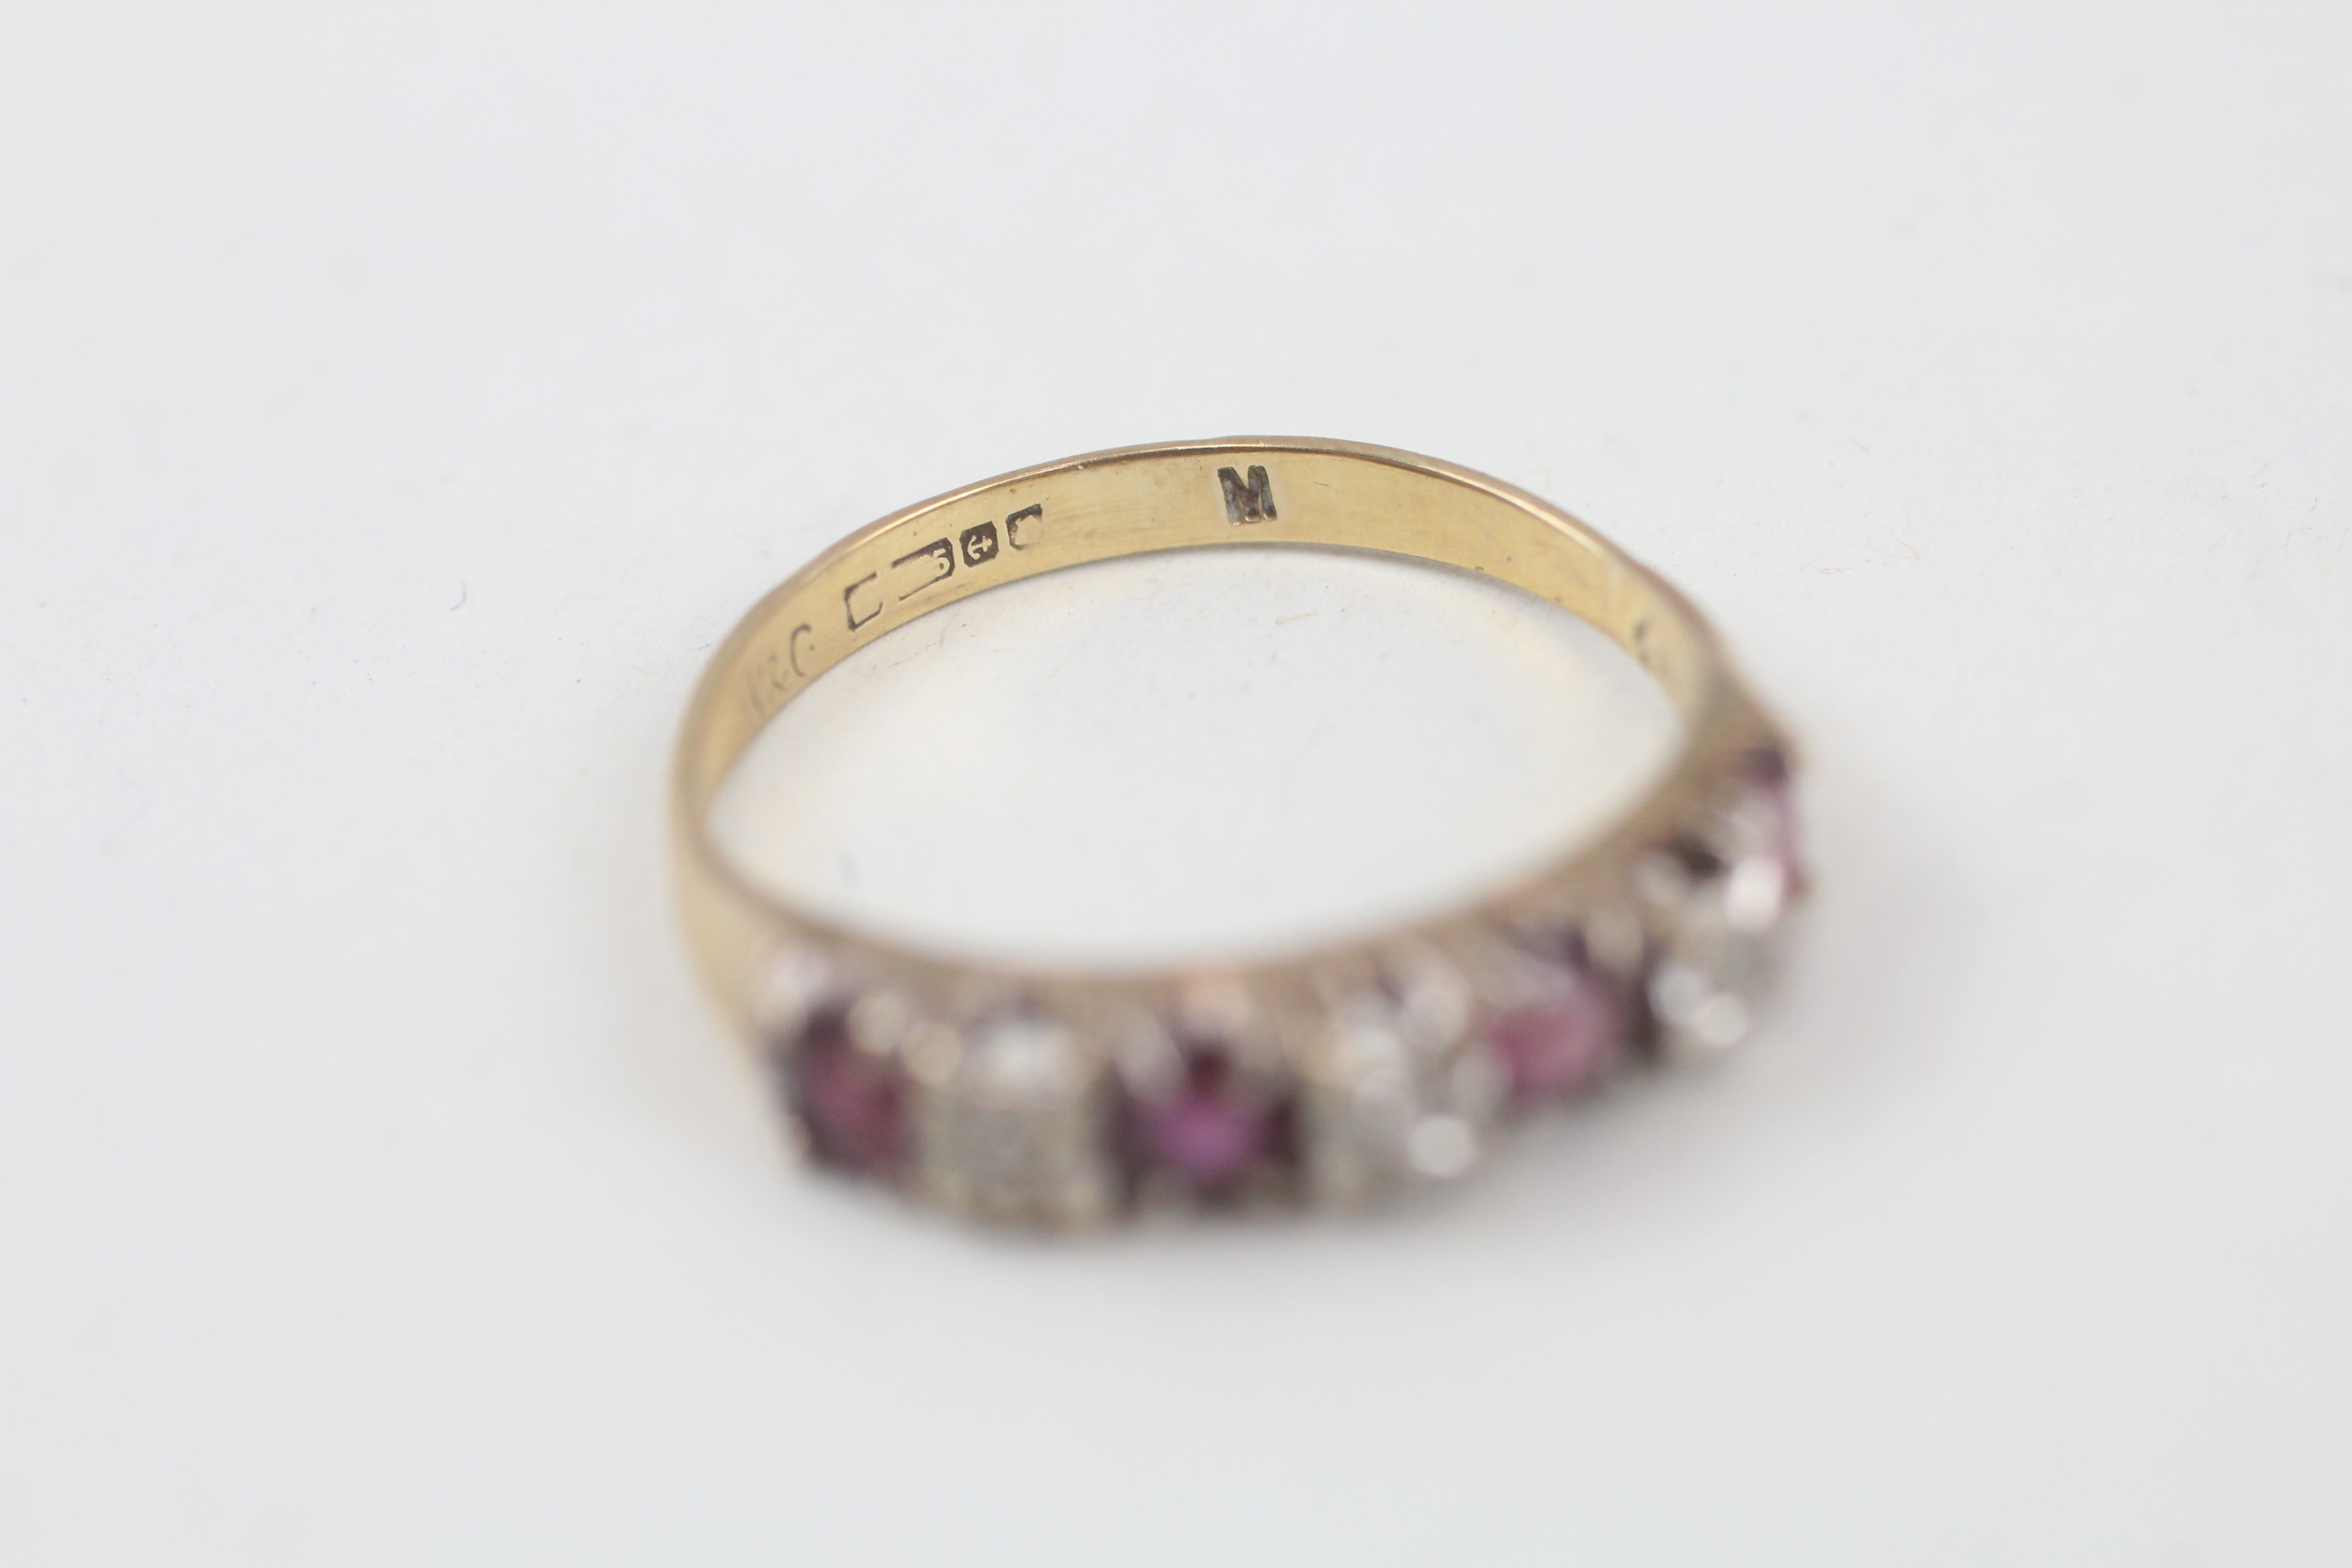 9ct gold diamond & ruby seven stone ring Size P 1/2 - 2 g - Image 3 of 6